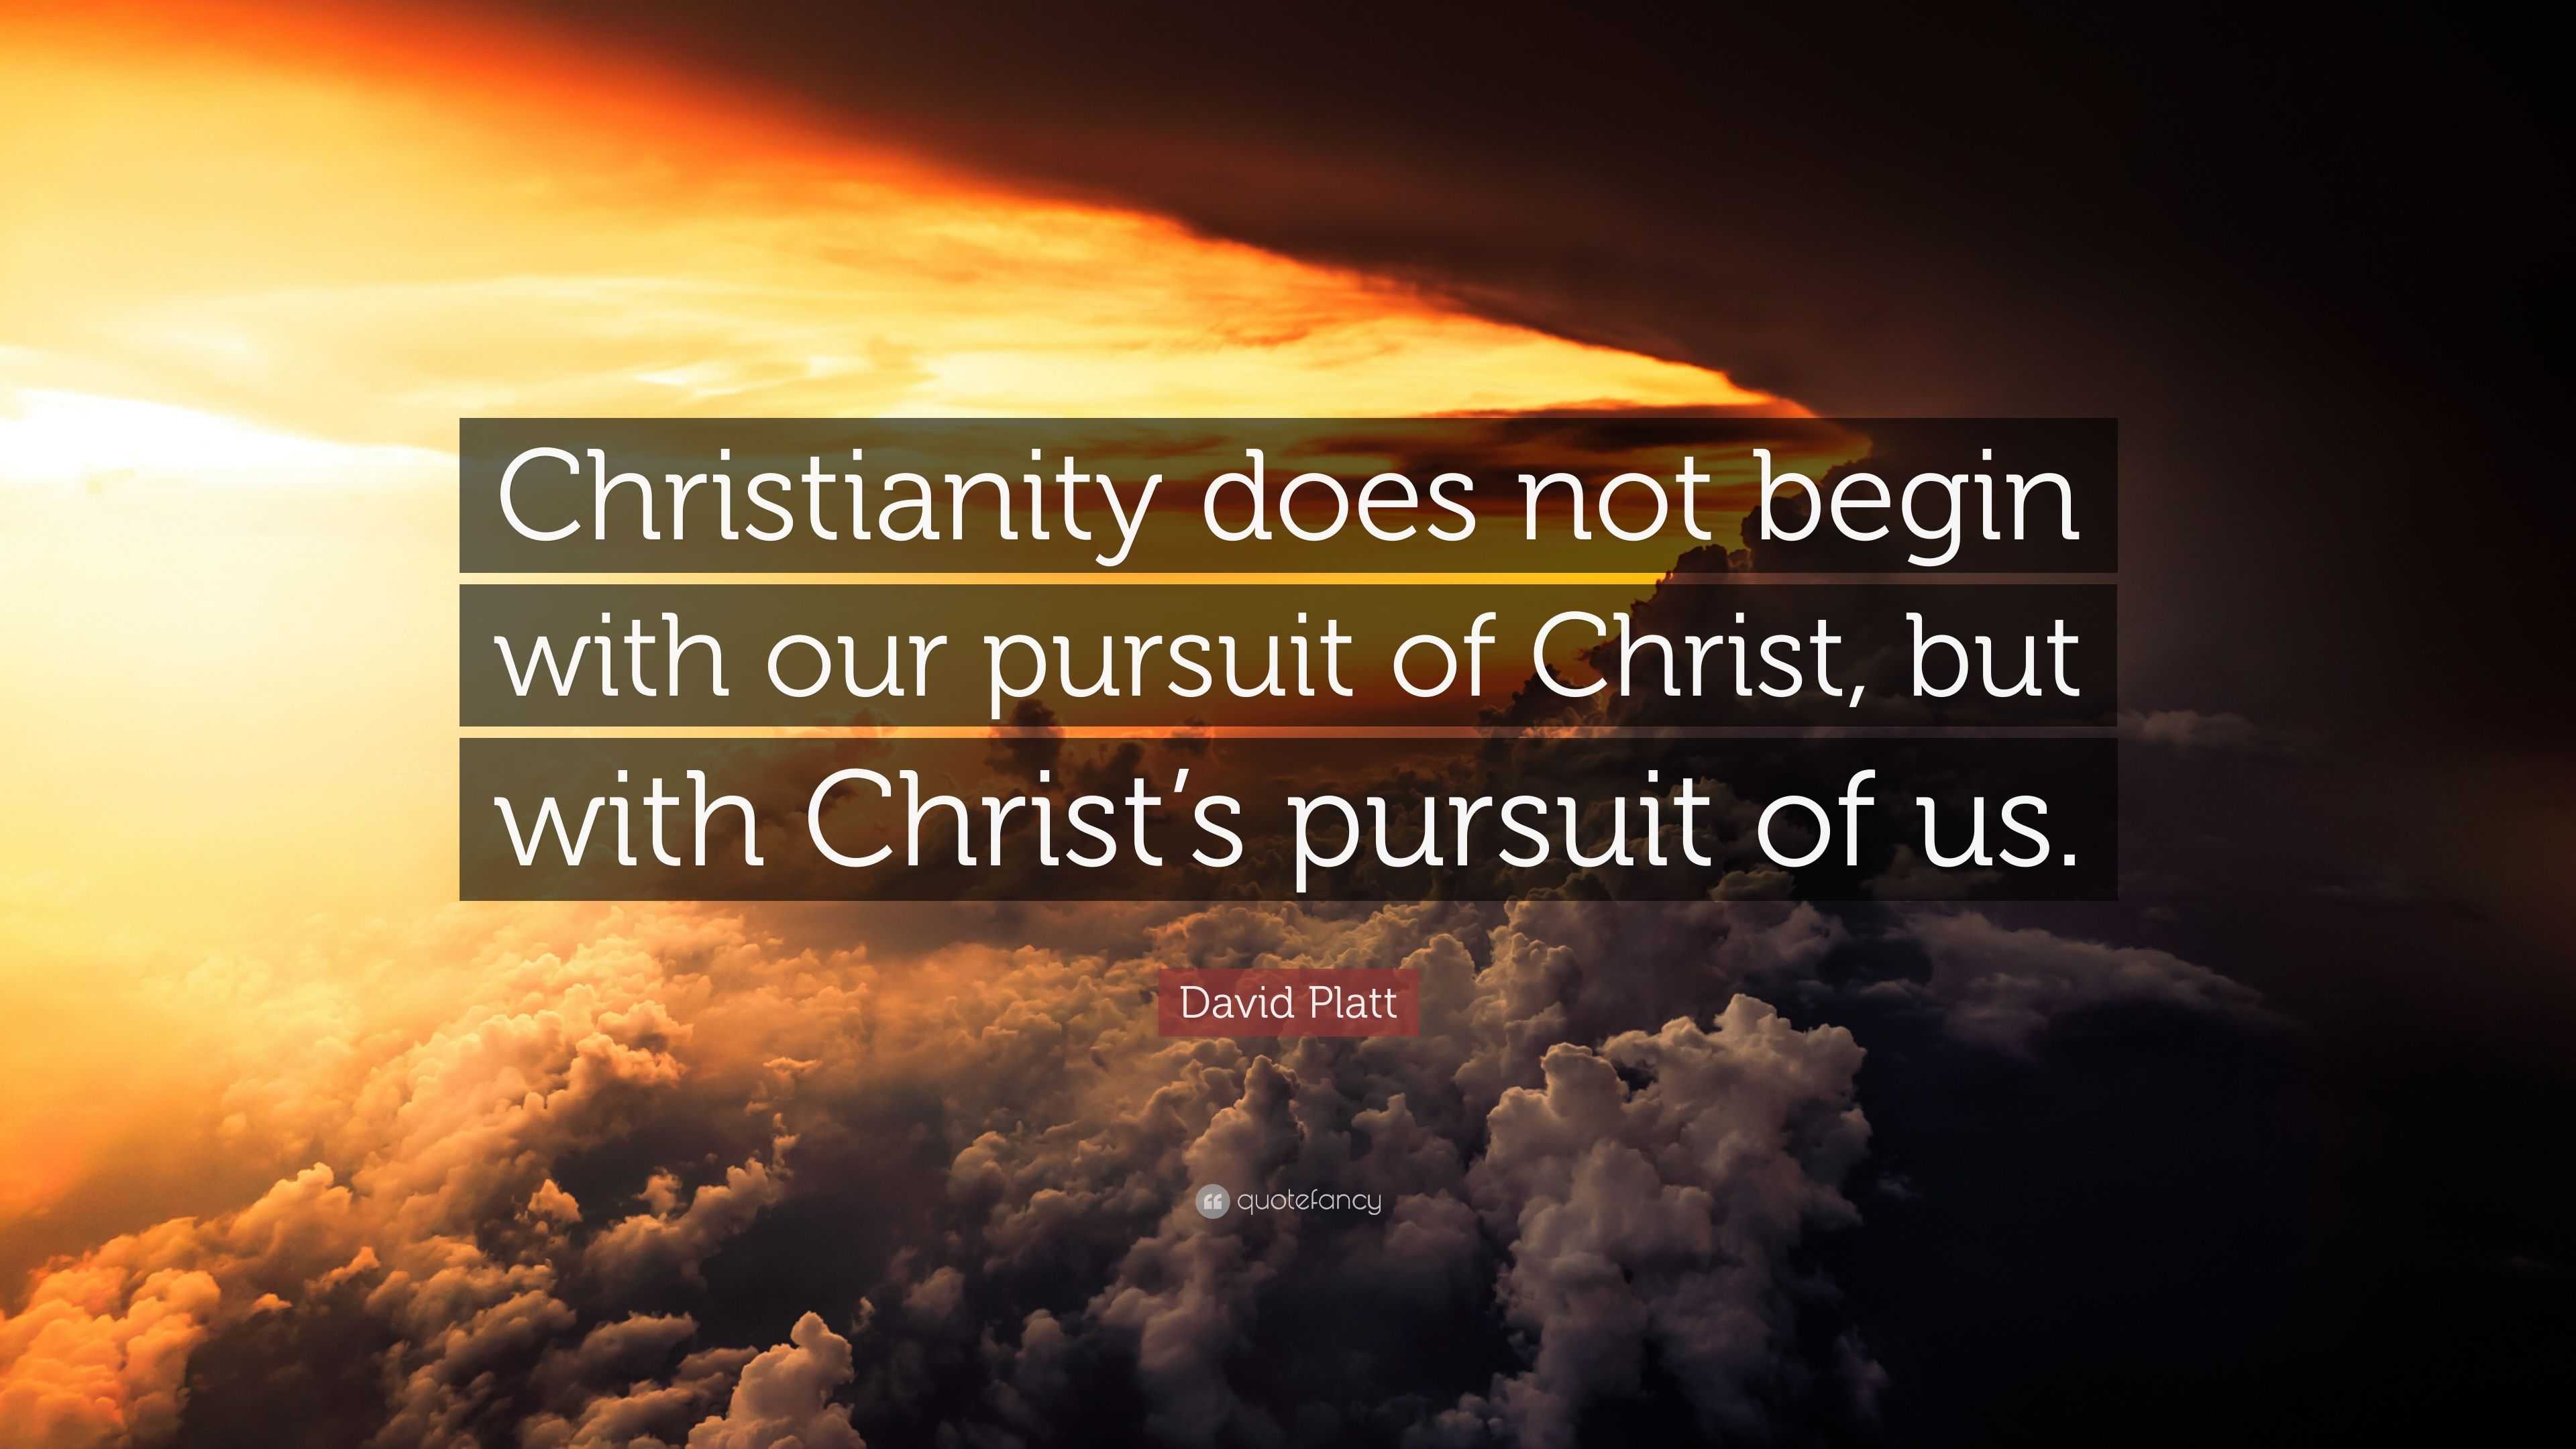 David Platt Quote: “Christianity does not begin with our pursuit of ...